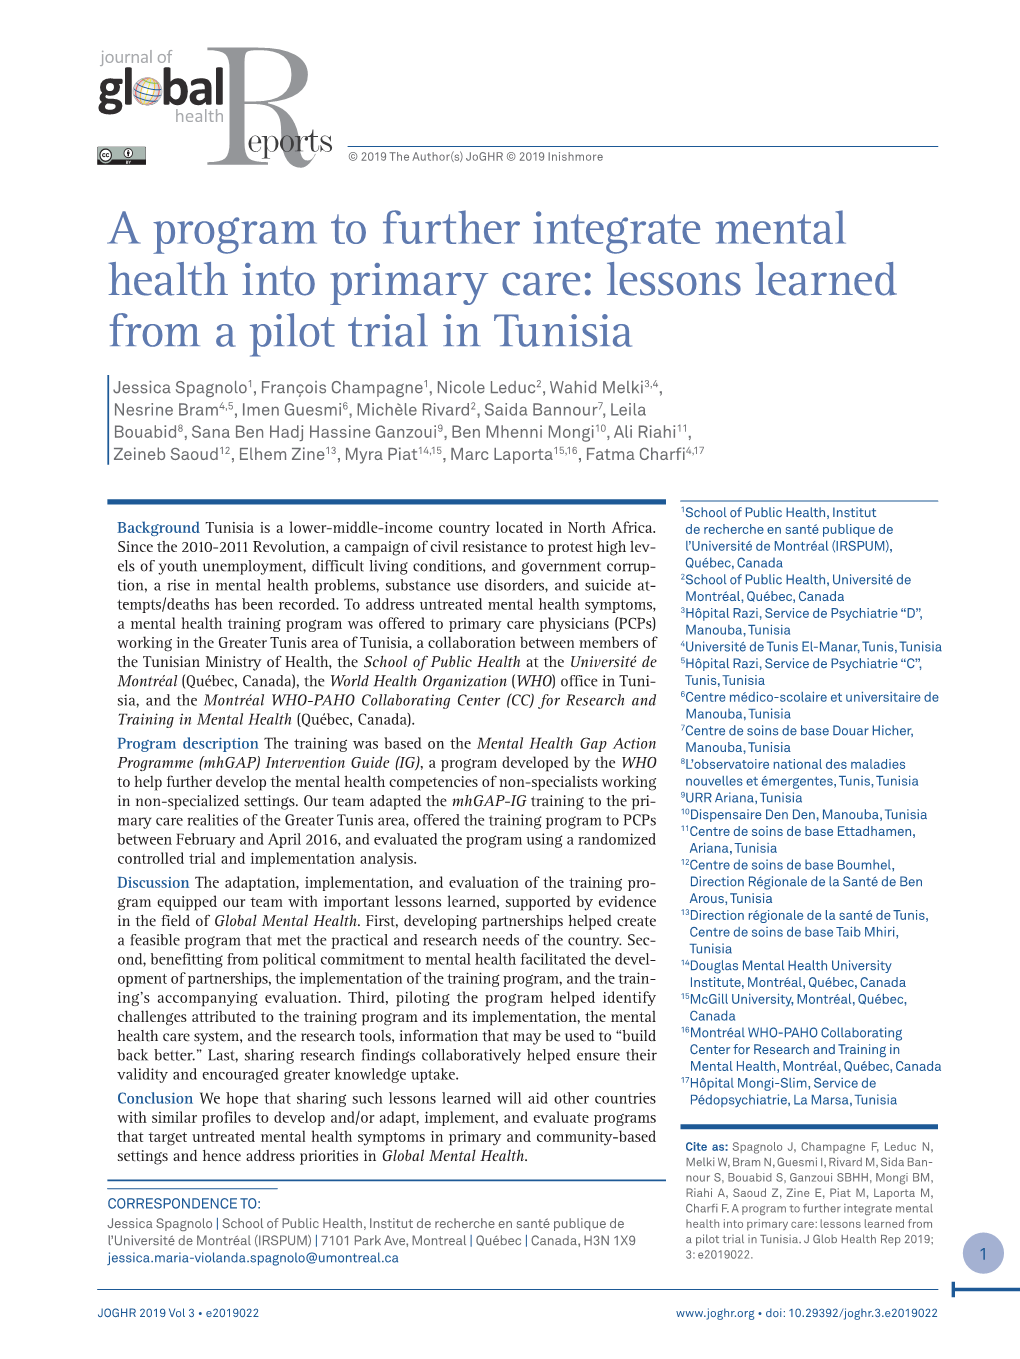 A Program to Further Integrate Mental Health Into Primary Care: Lessons Learned from a Pilot Trial in Tunisia